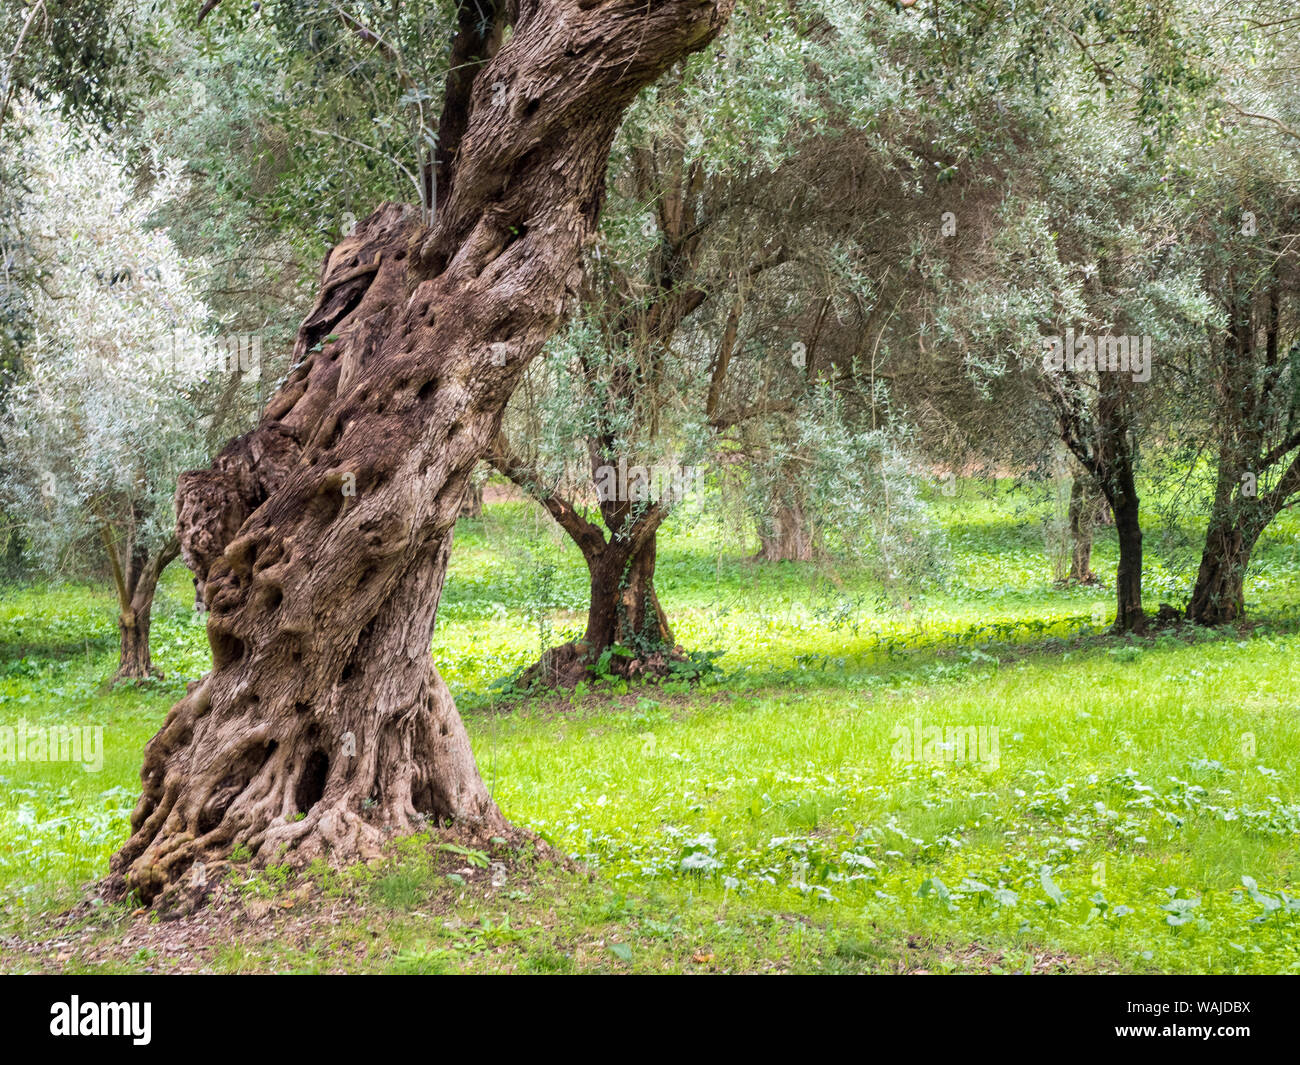 Old Mediterranean olive trees. The botanical name Olea europaea, meaning 'European olive', is a species of small tree in the family Oleaceae. Stock Photo